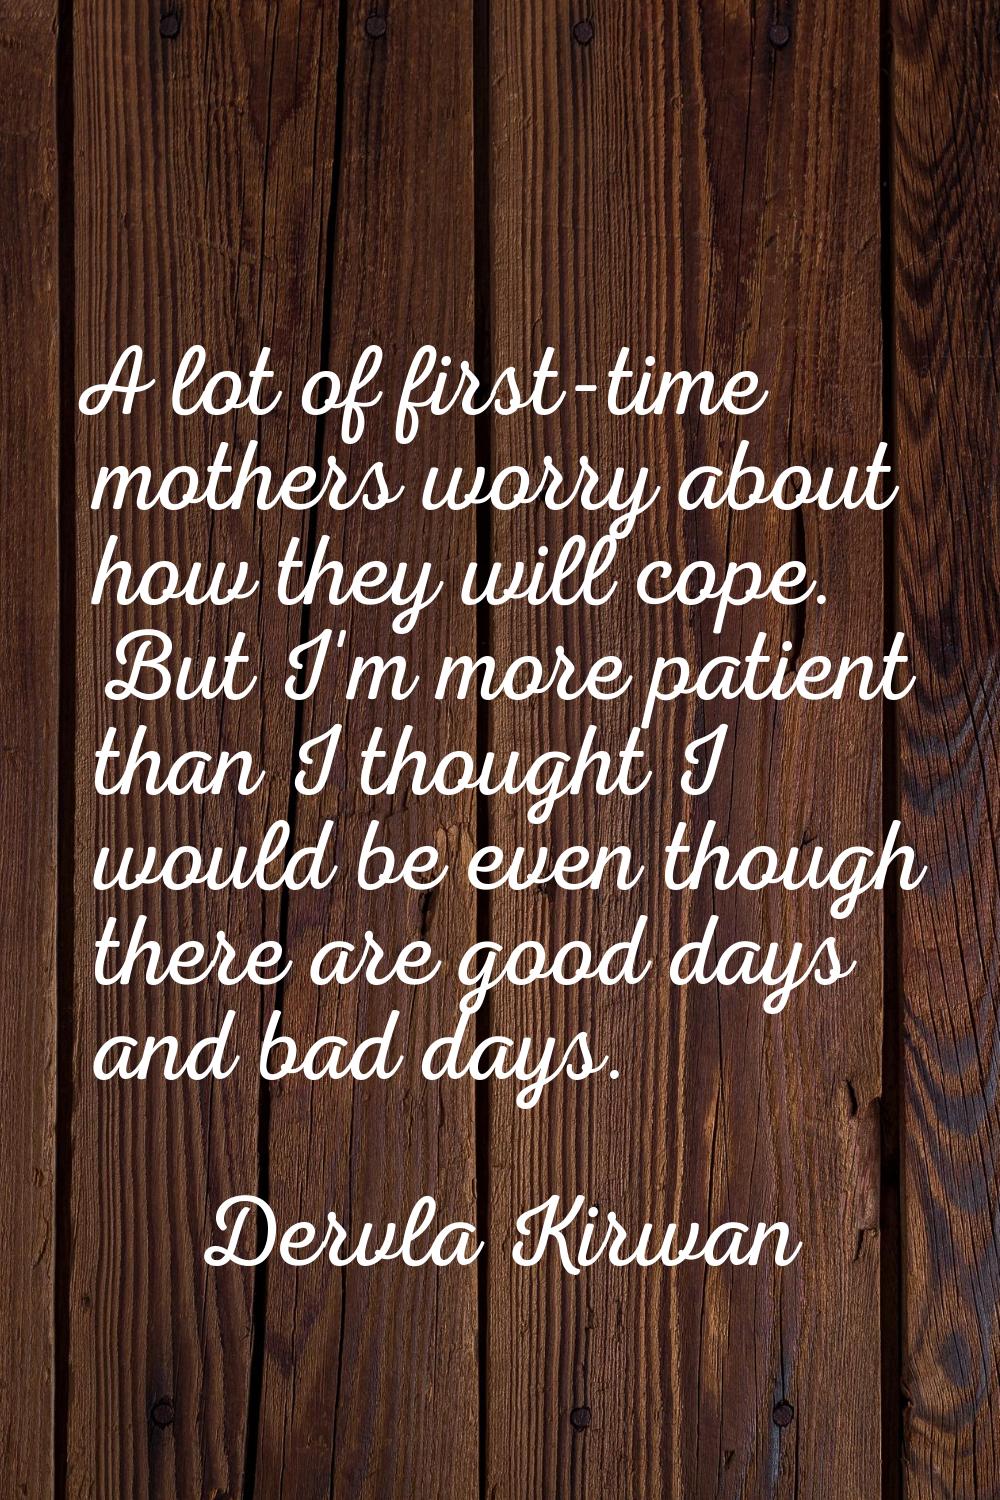 A lot of first-time mothers worry about how they will cope. But I'm more patient than I thought I w